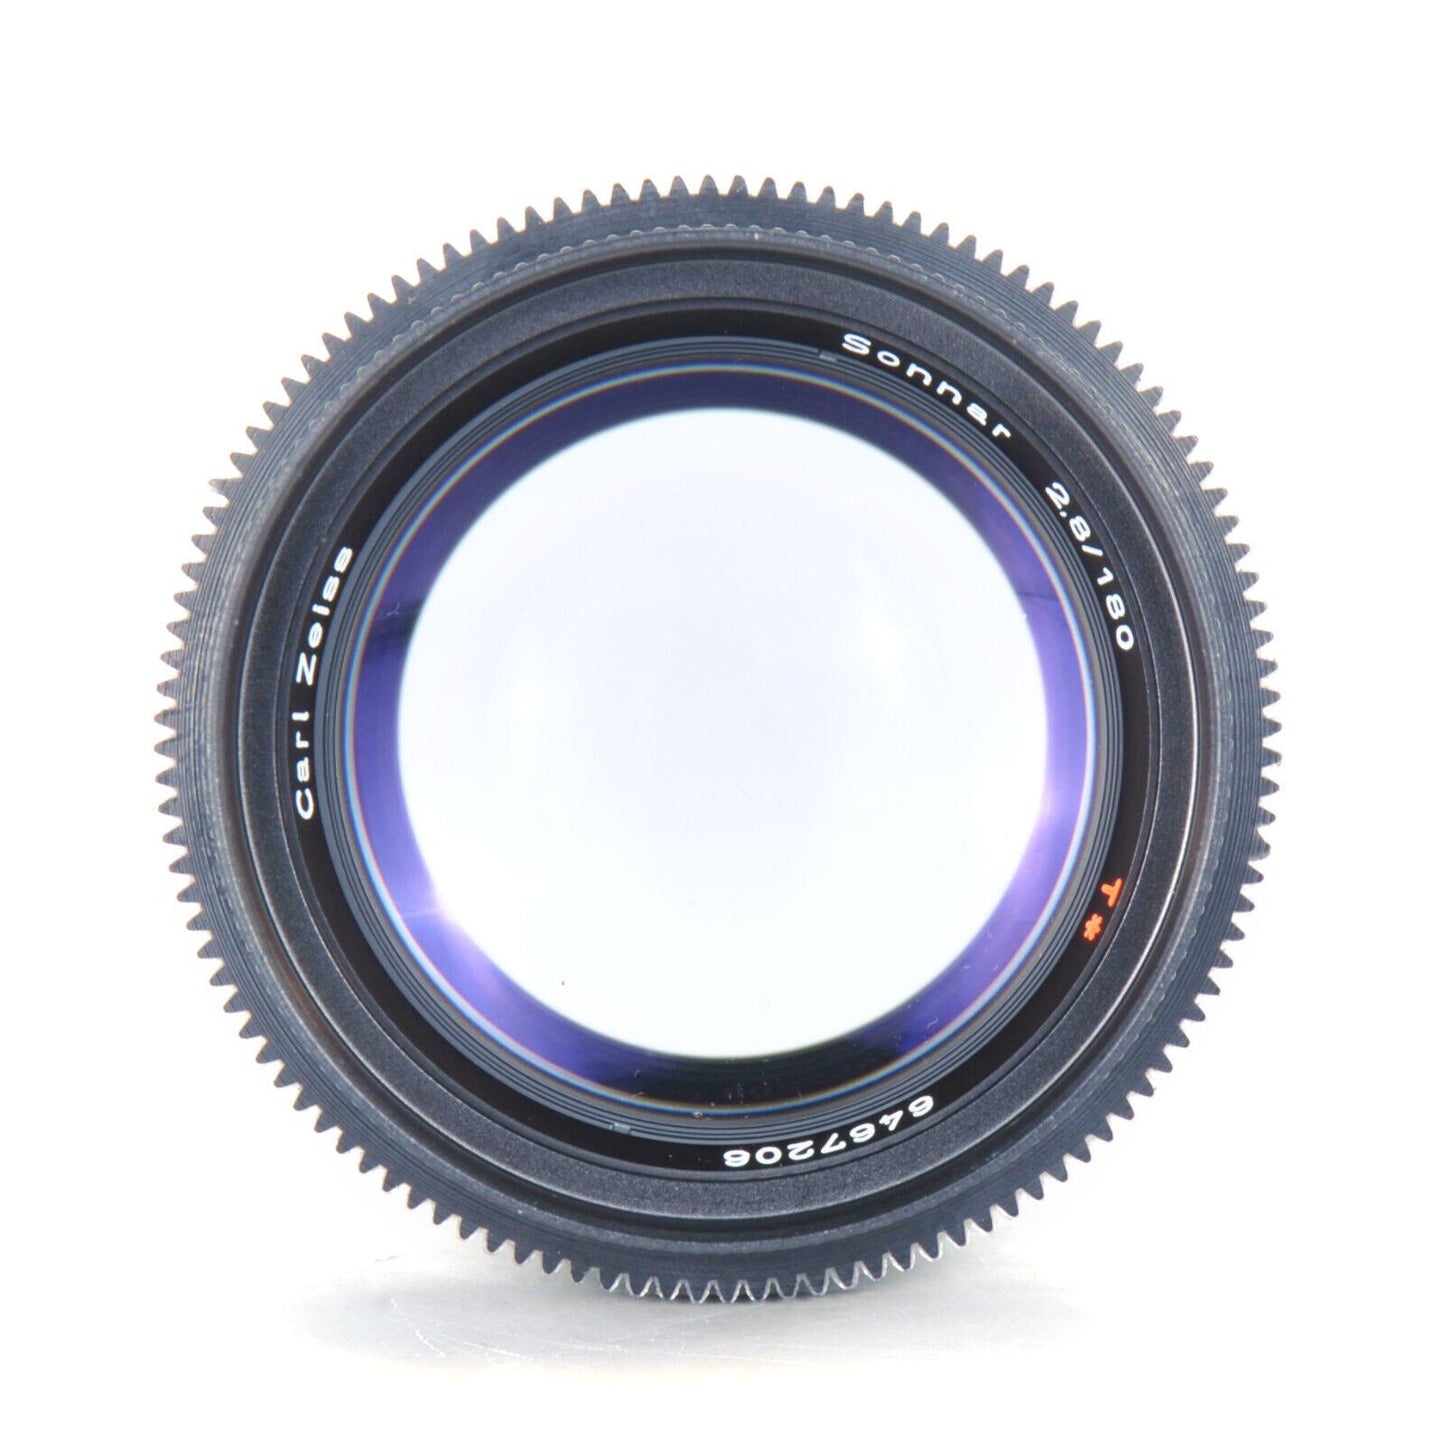 Cine Modded Carl Zeiss Sonnar T* 180mm F2.8 Prime Lens For Canon EF Mount! - TerPhoto Store